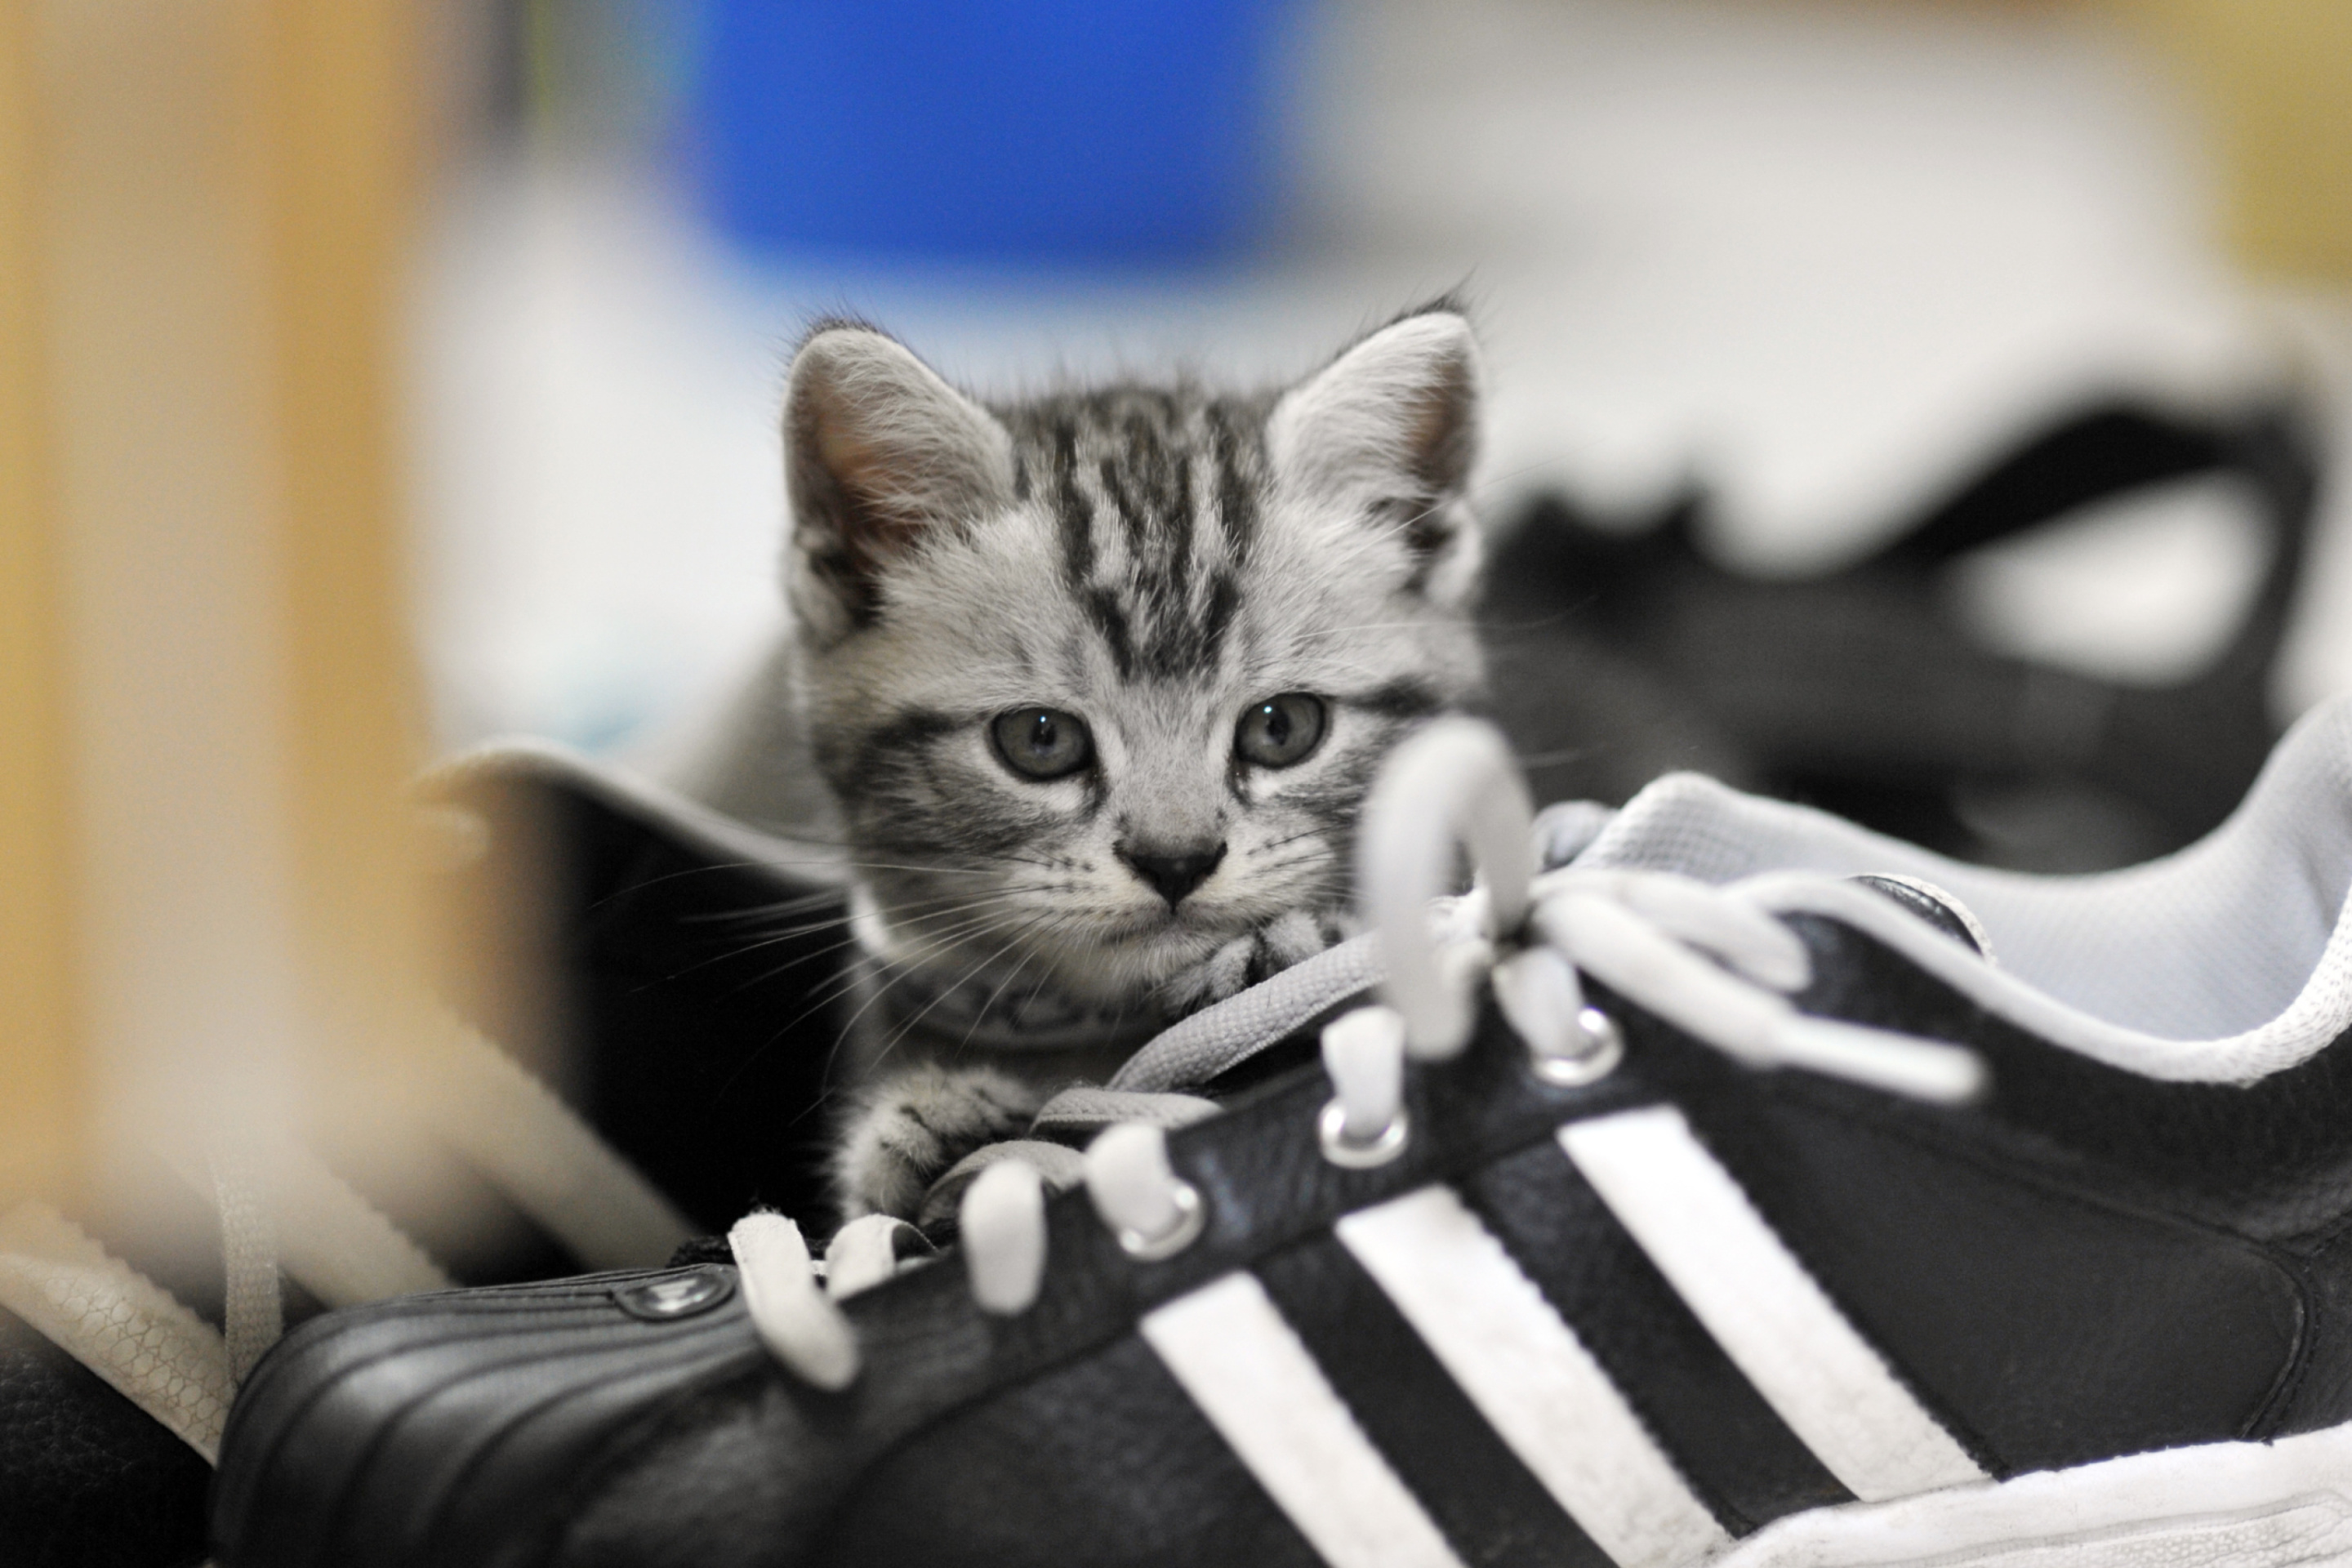 Kitten with shoes wallpaper 2880x1920